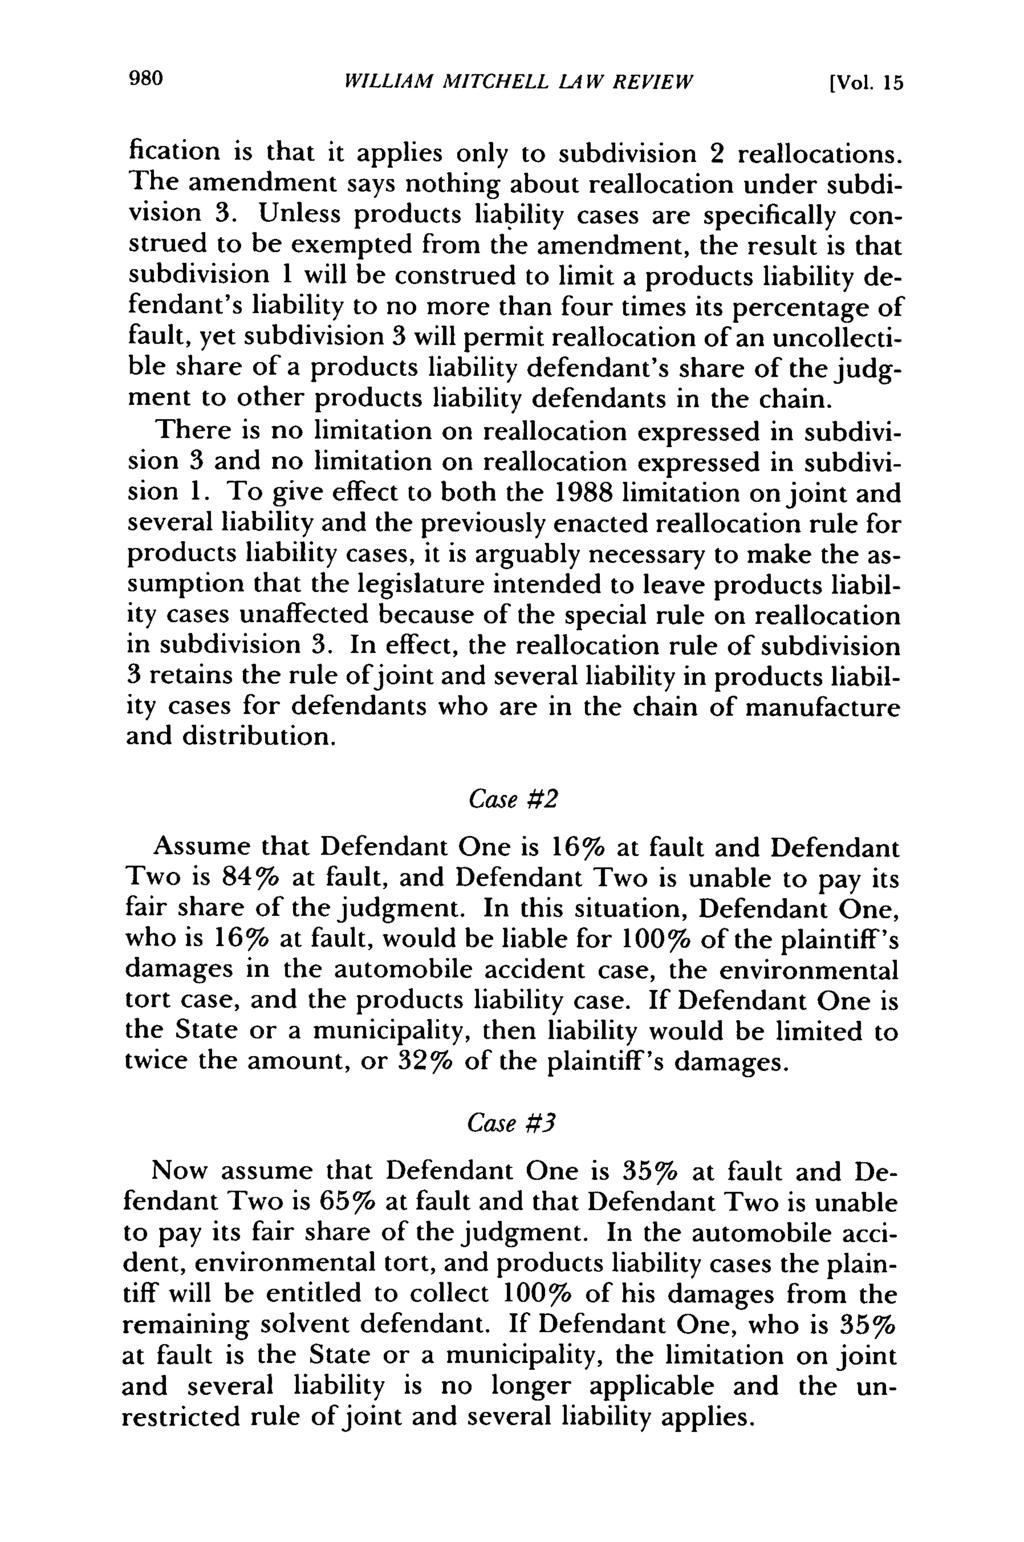 William Mitchell Law Review, Vol. 15, Iss. 4 [1989], Art. 3 http://open.